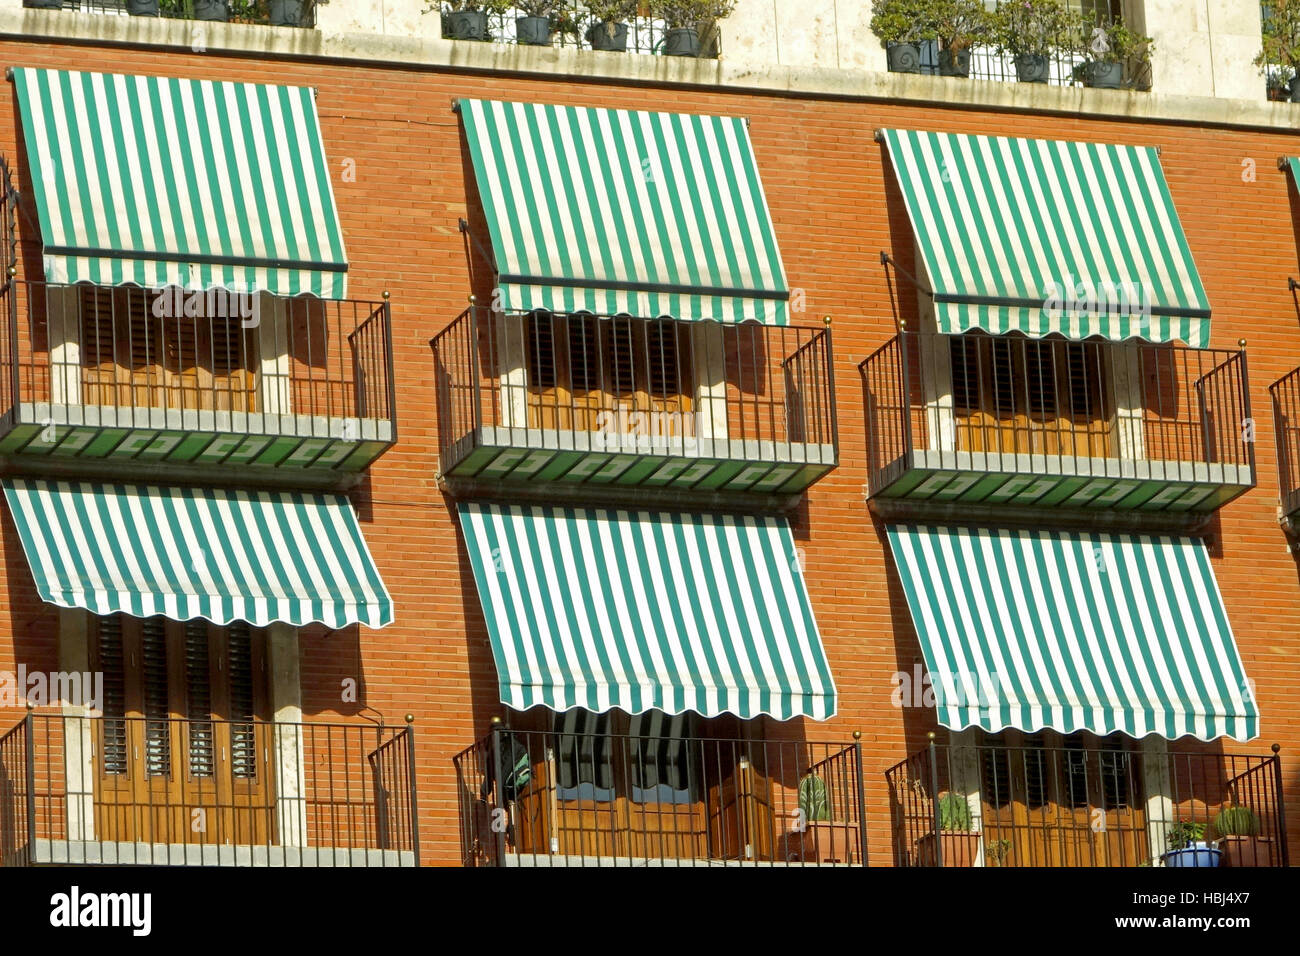 Awnings at a house in spain Stock Photo